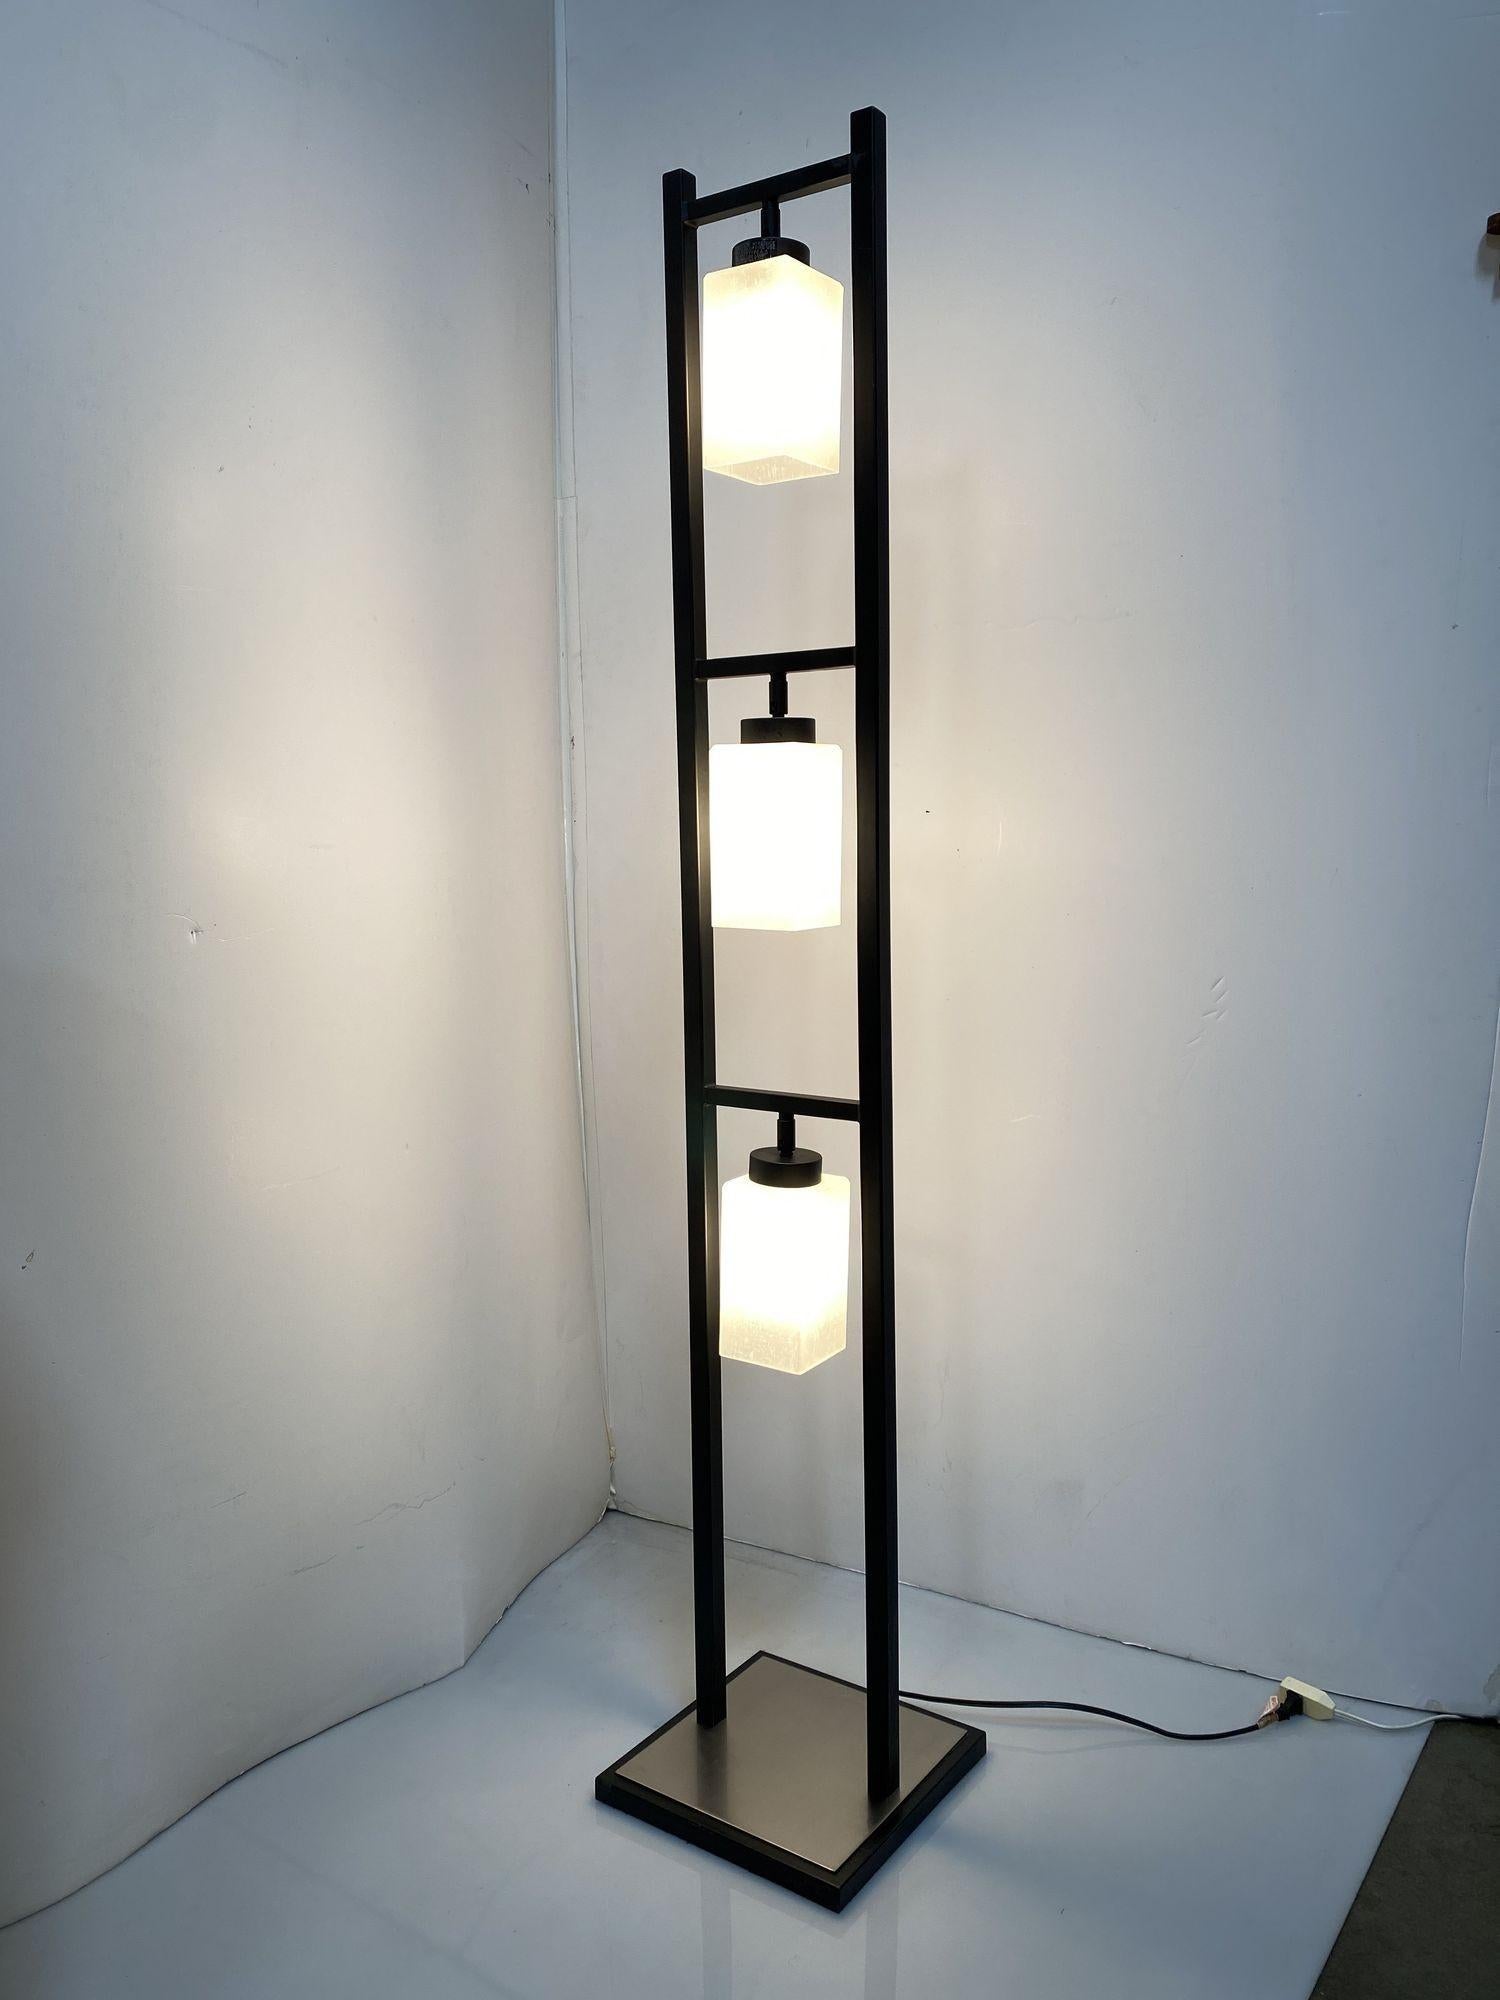 Minimal and modern design heavy black metal 3 light floor lamp with a stainless steel floor plate and square cubist milk glass shades.
Circa 1990, USA.